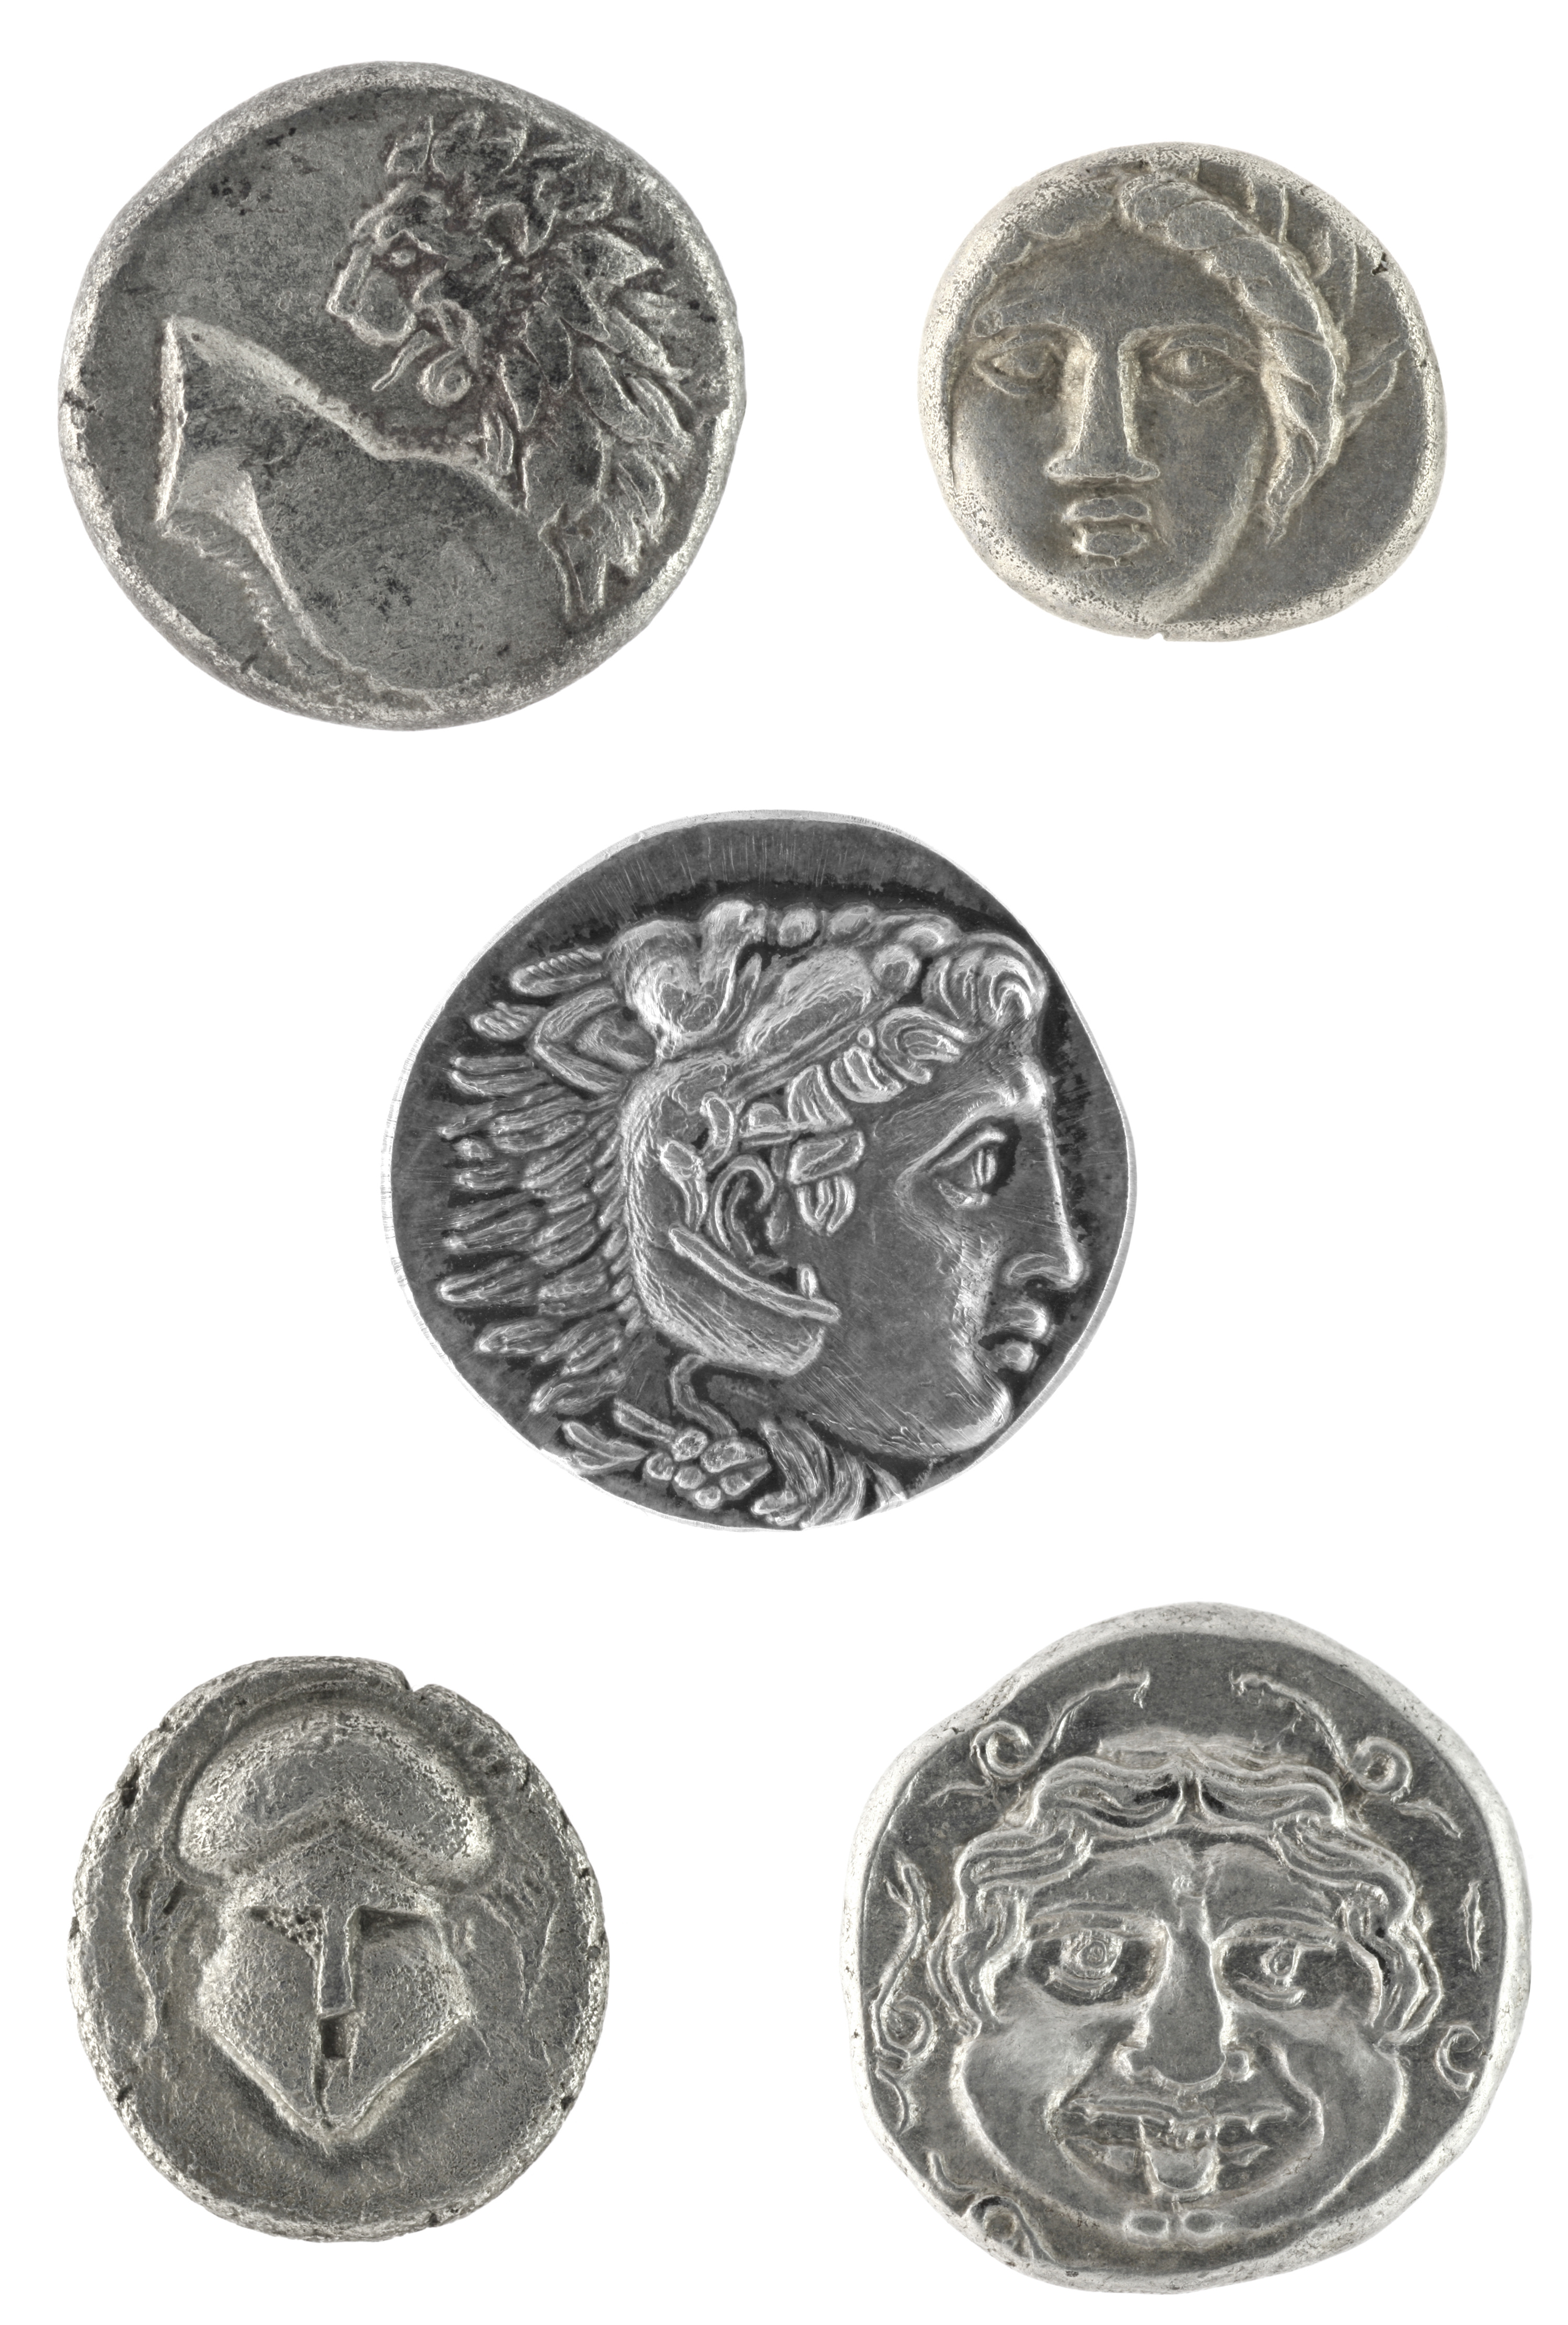 Ancient Greek coins. Image courtesy of Adobe Stock.